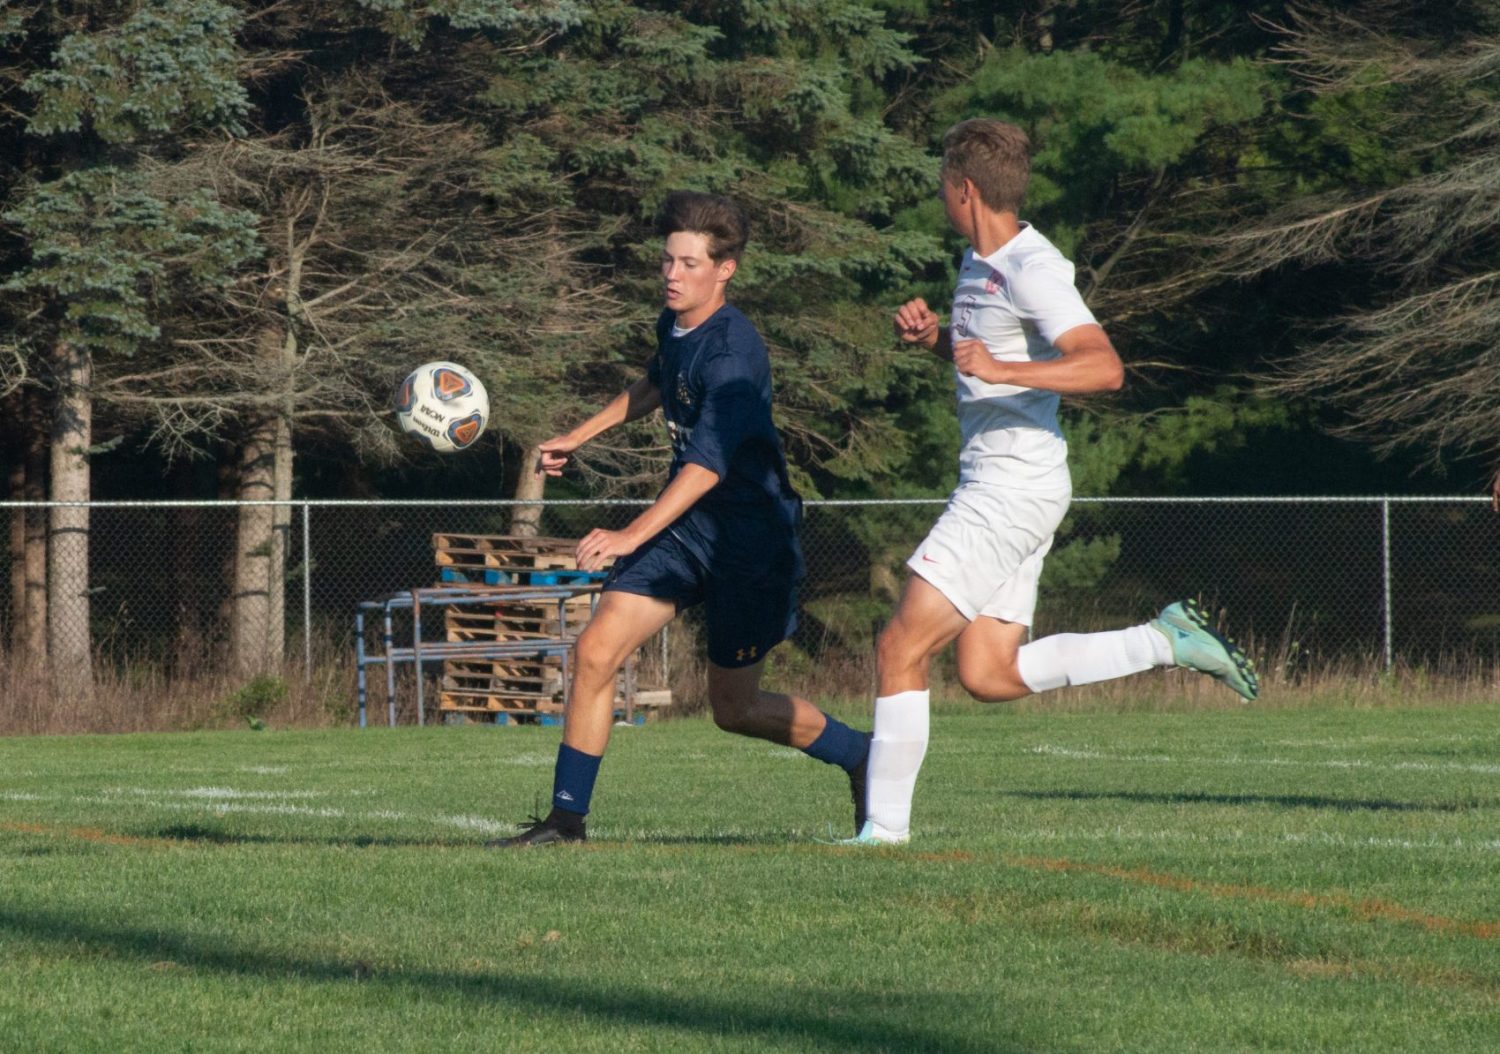 Manistee soccer slips by Orchard View by the slimmest of margins, 1-0